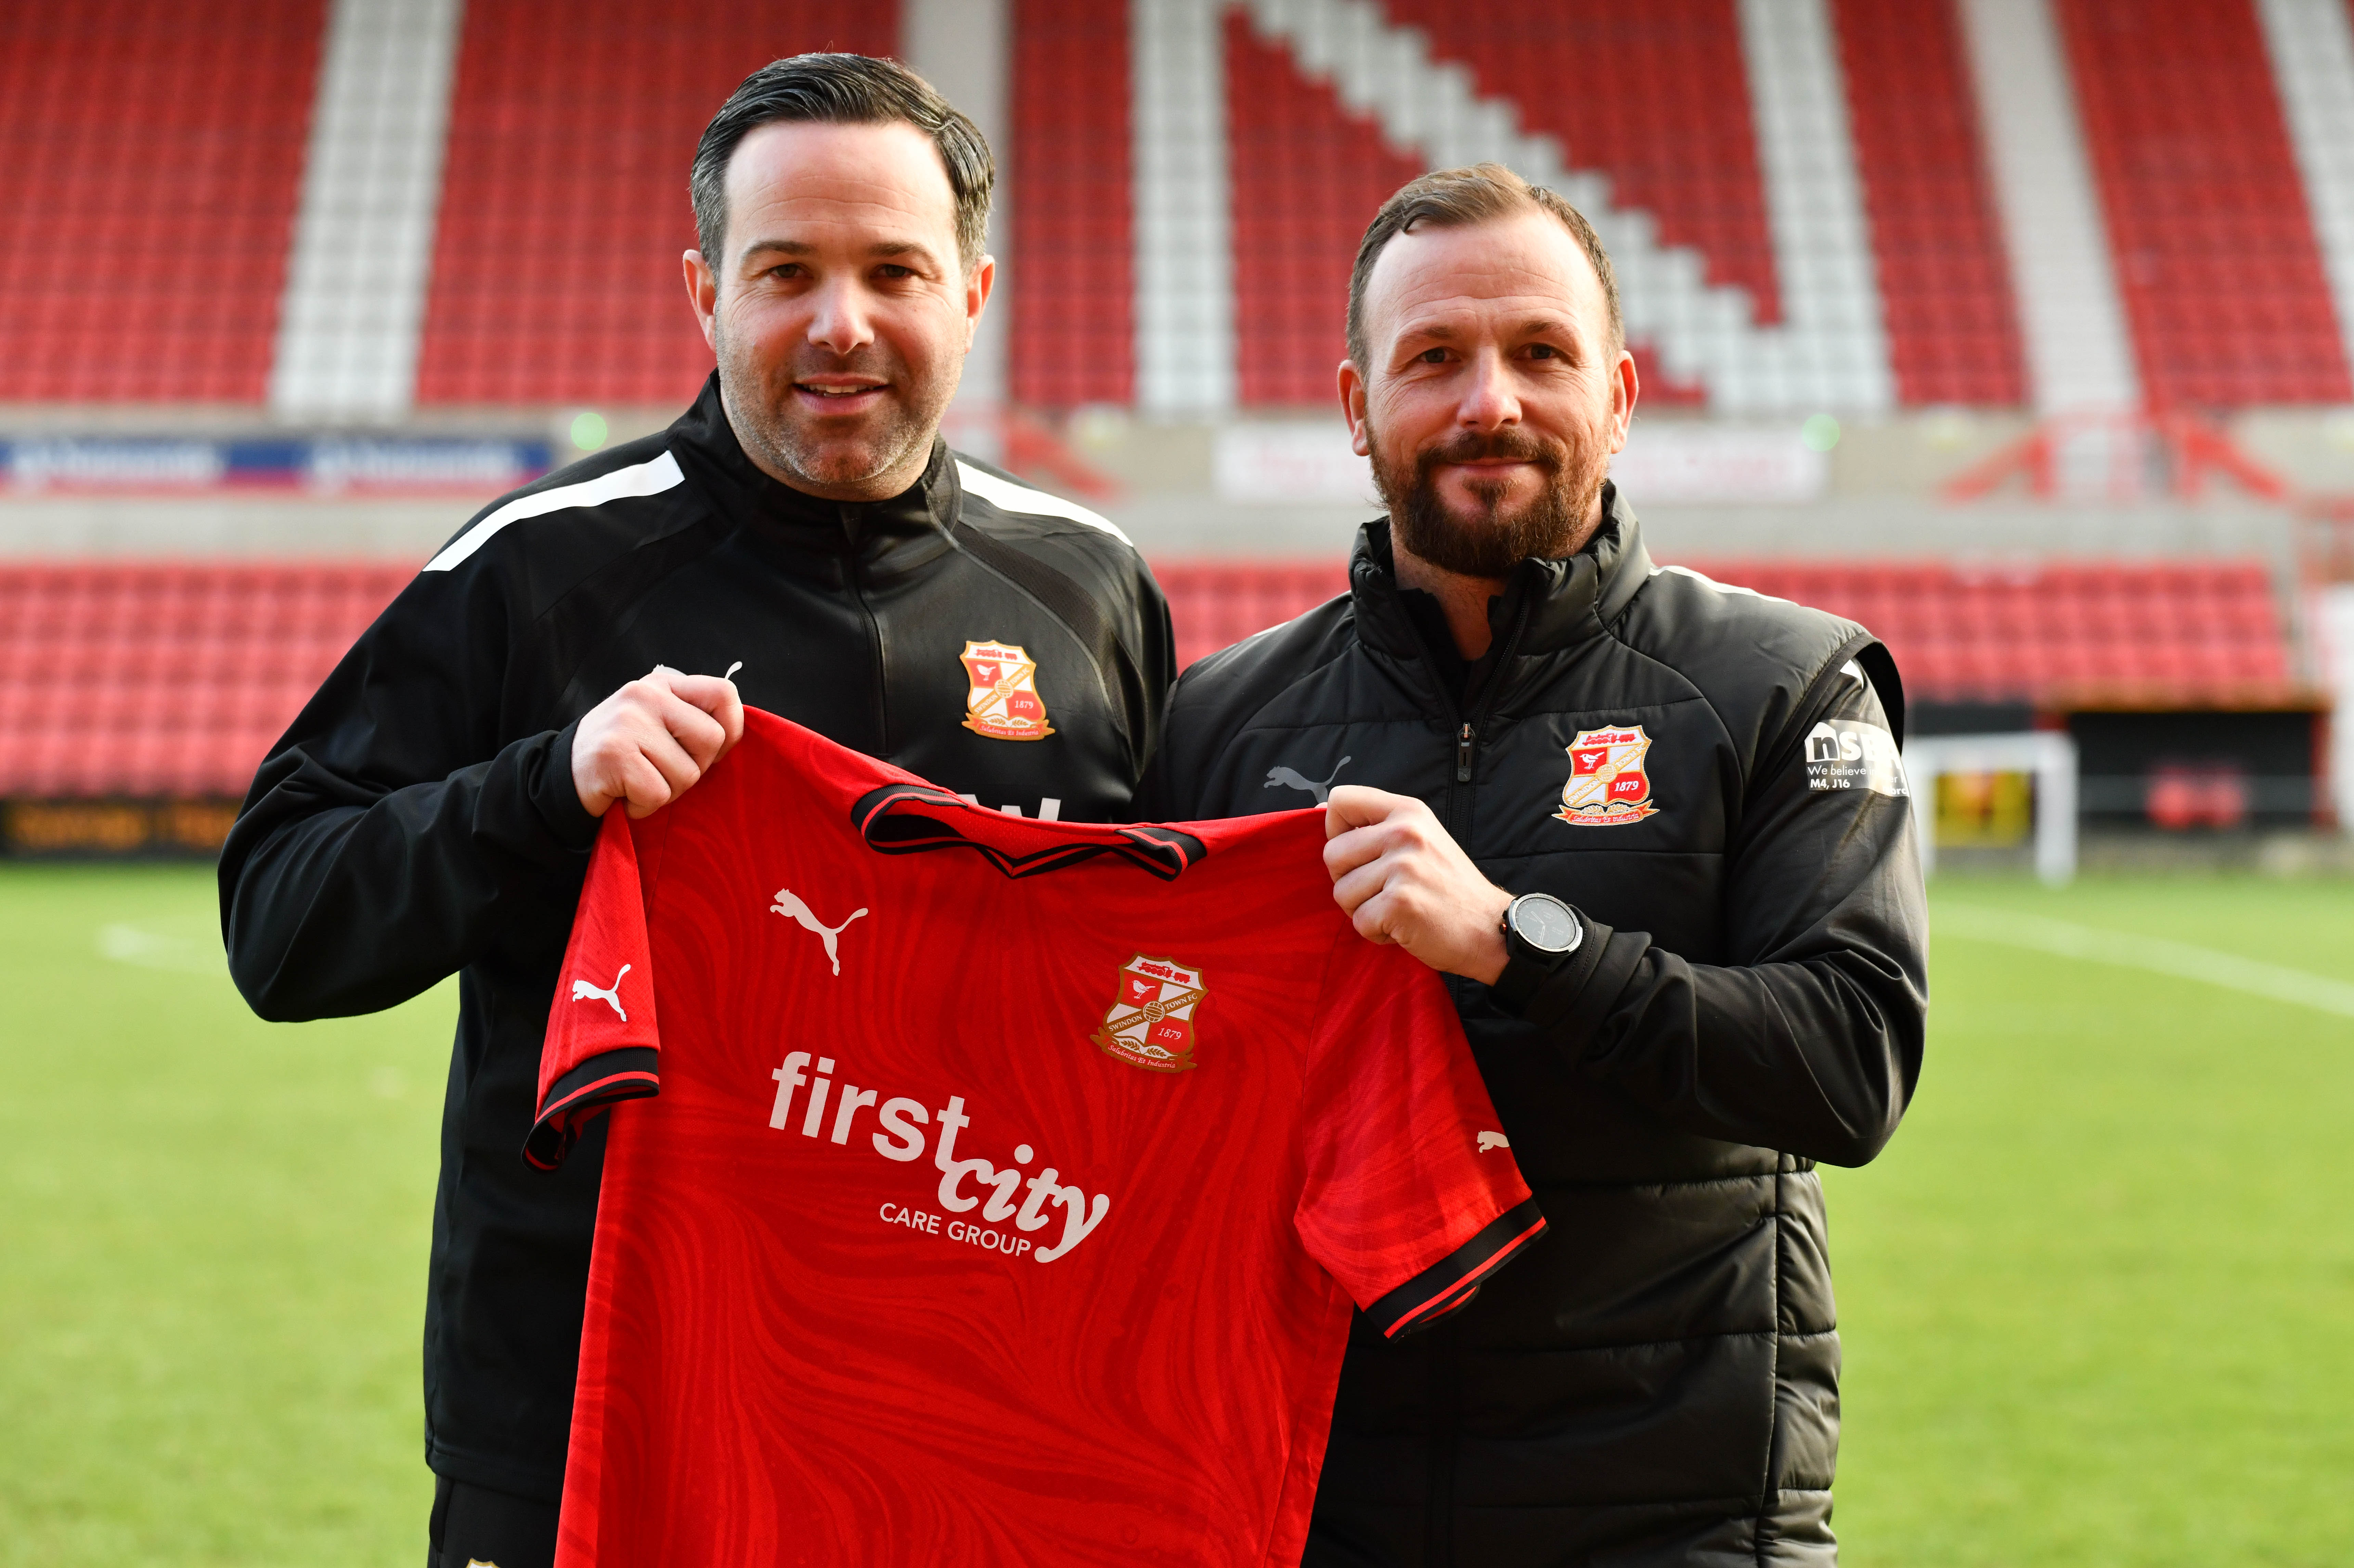 Swindon Town appoint former Chelsea assistant manager Jody Morris as new head coach